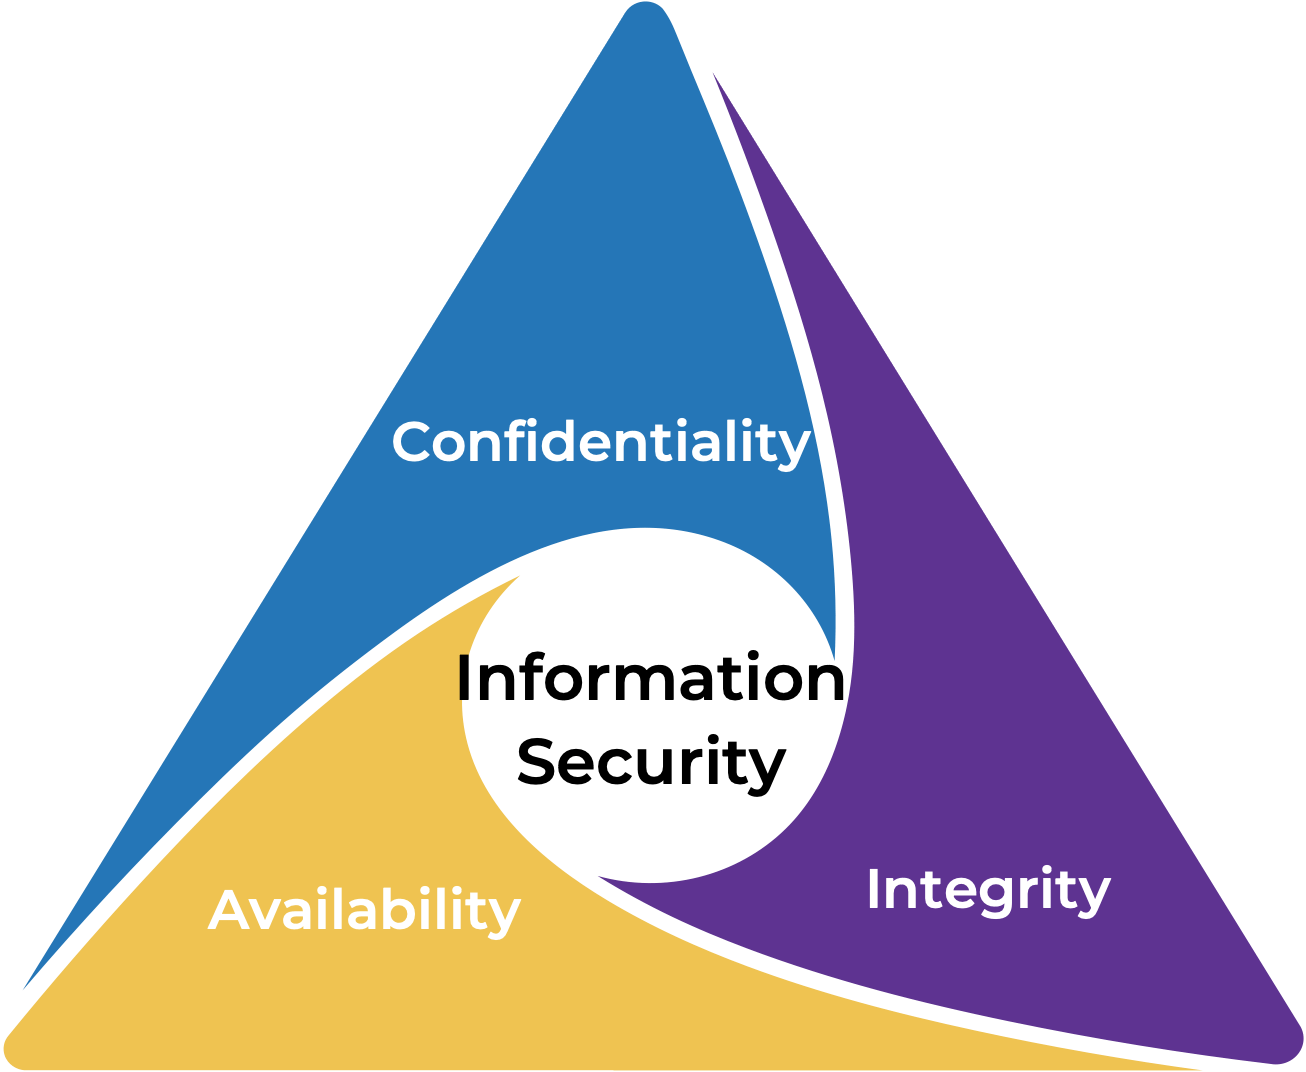 The CIA Triad for Information Security: Confidentiality, Integrity, Availability